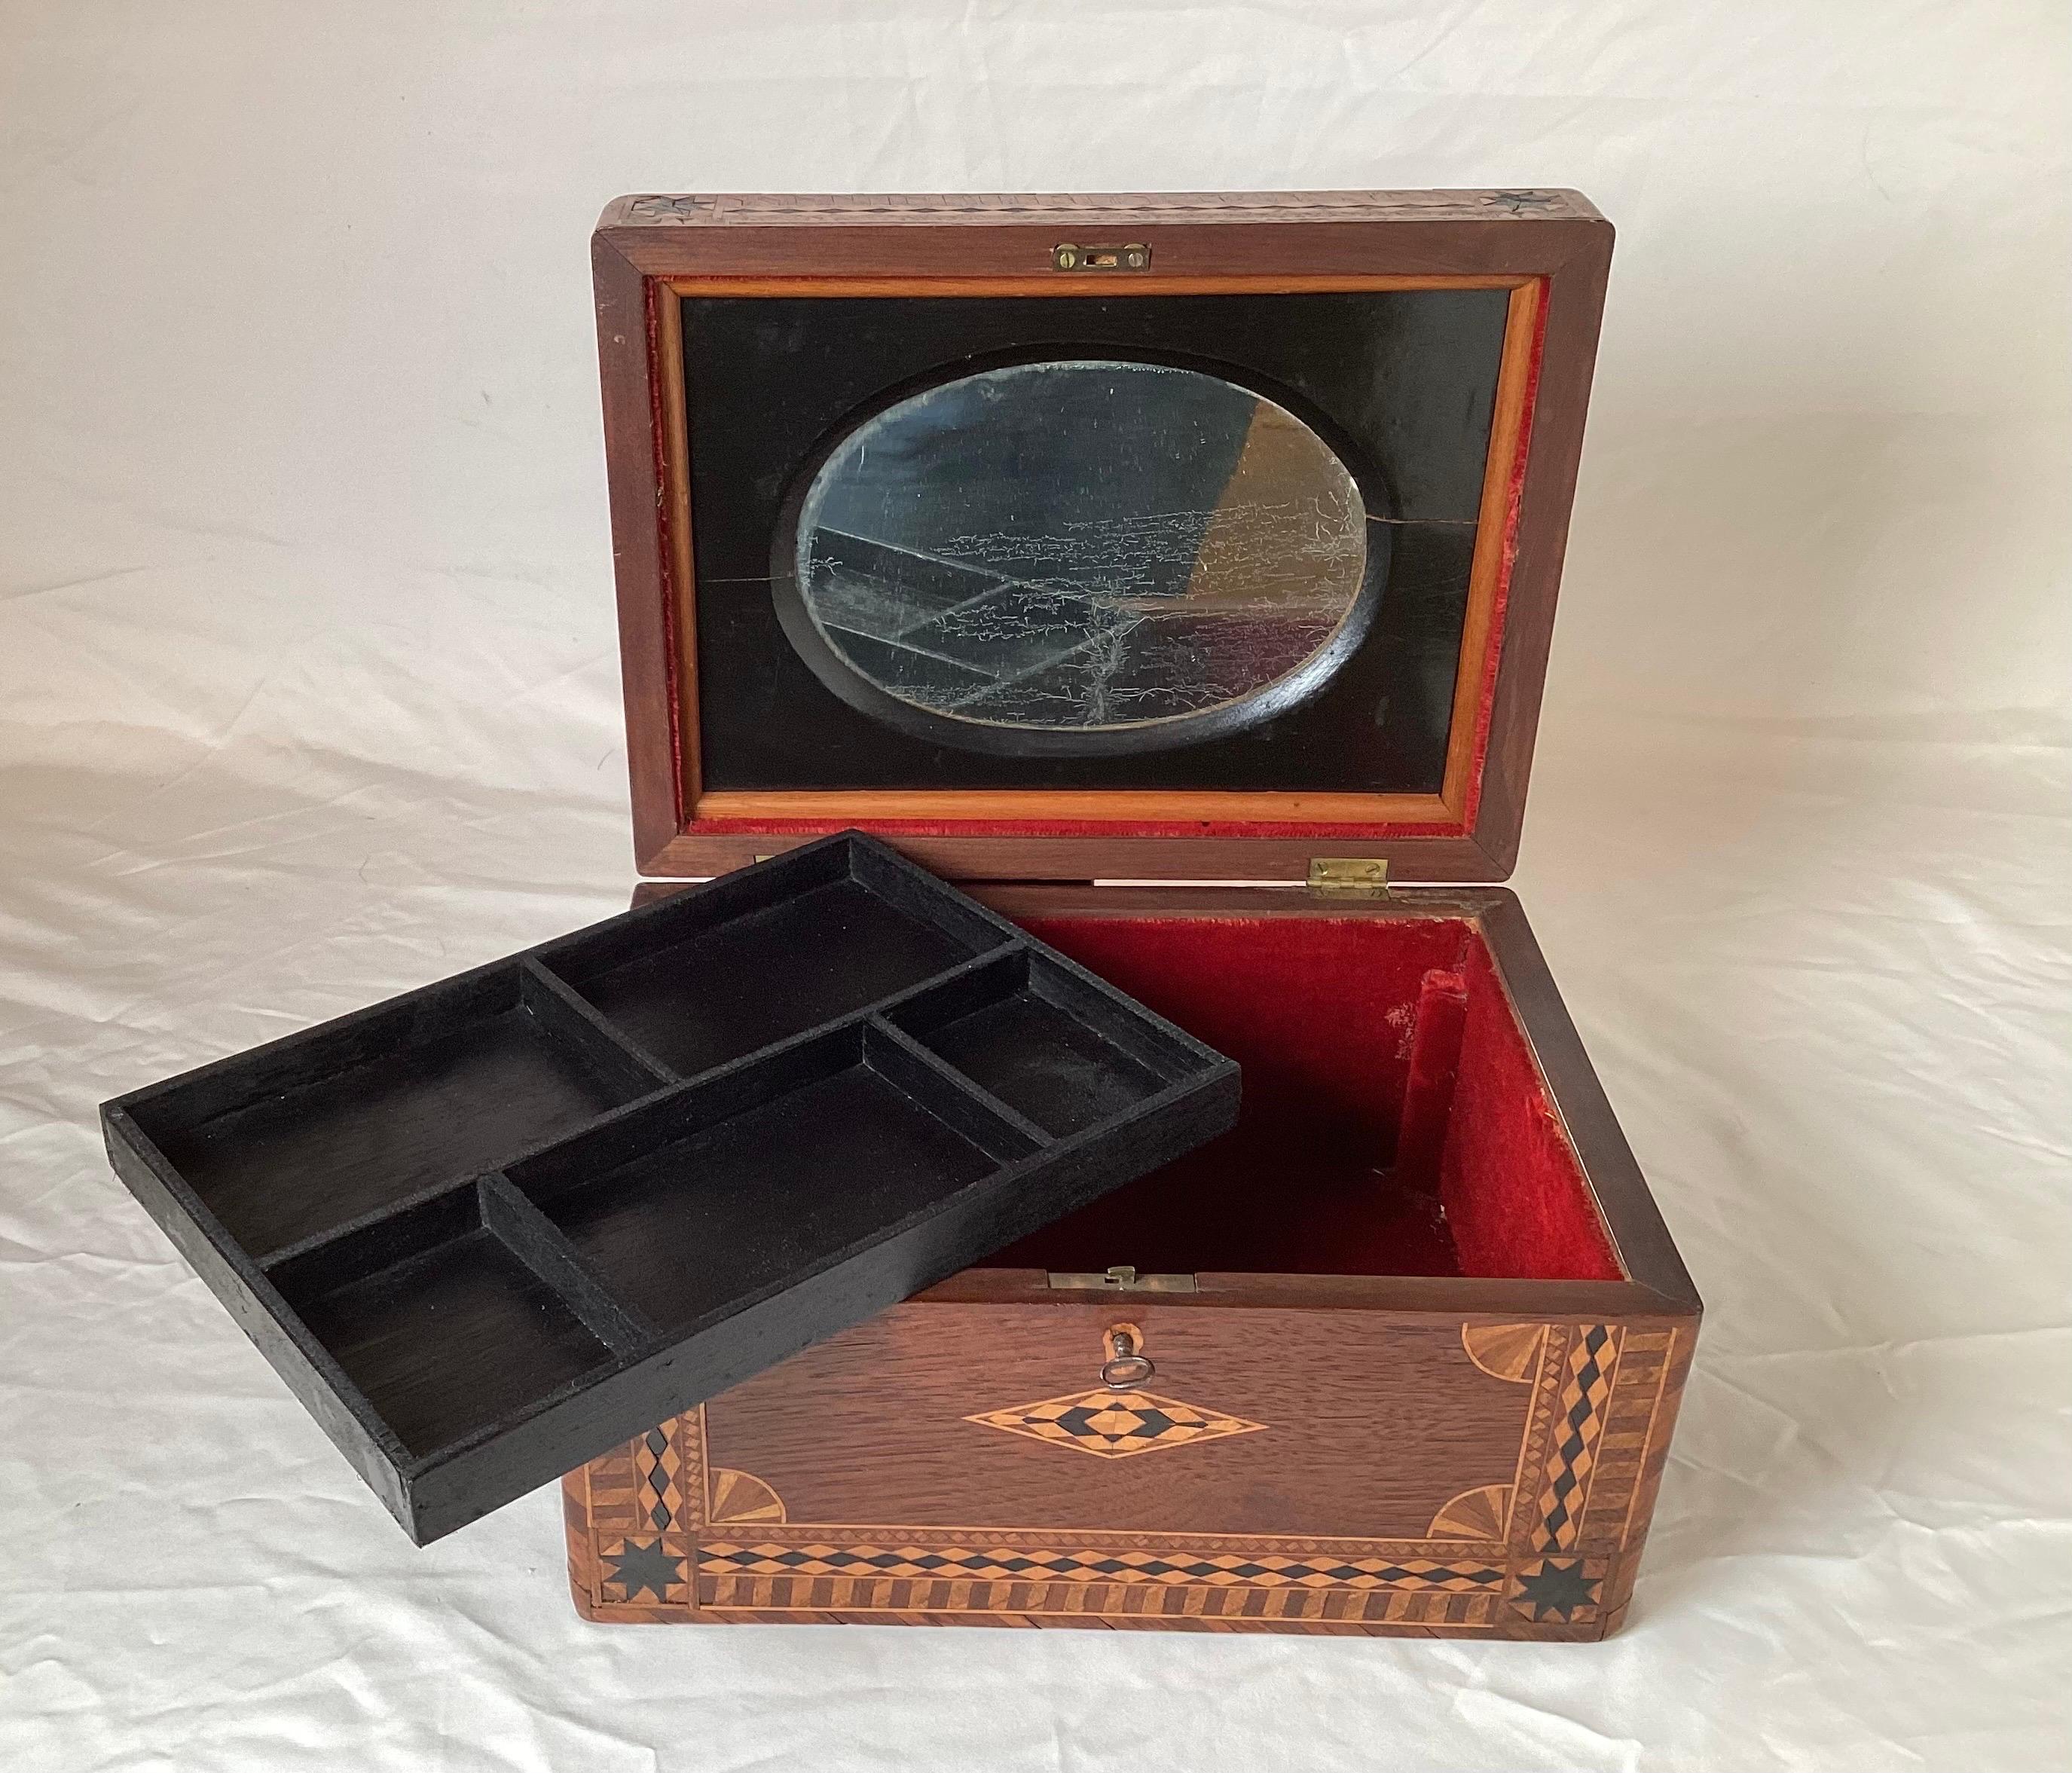 Mirror Exceptional 19th Century Inlaid Jewelry Box For Sale